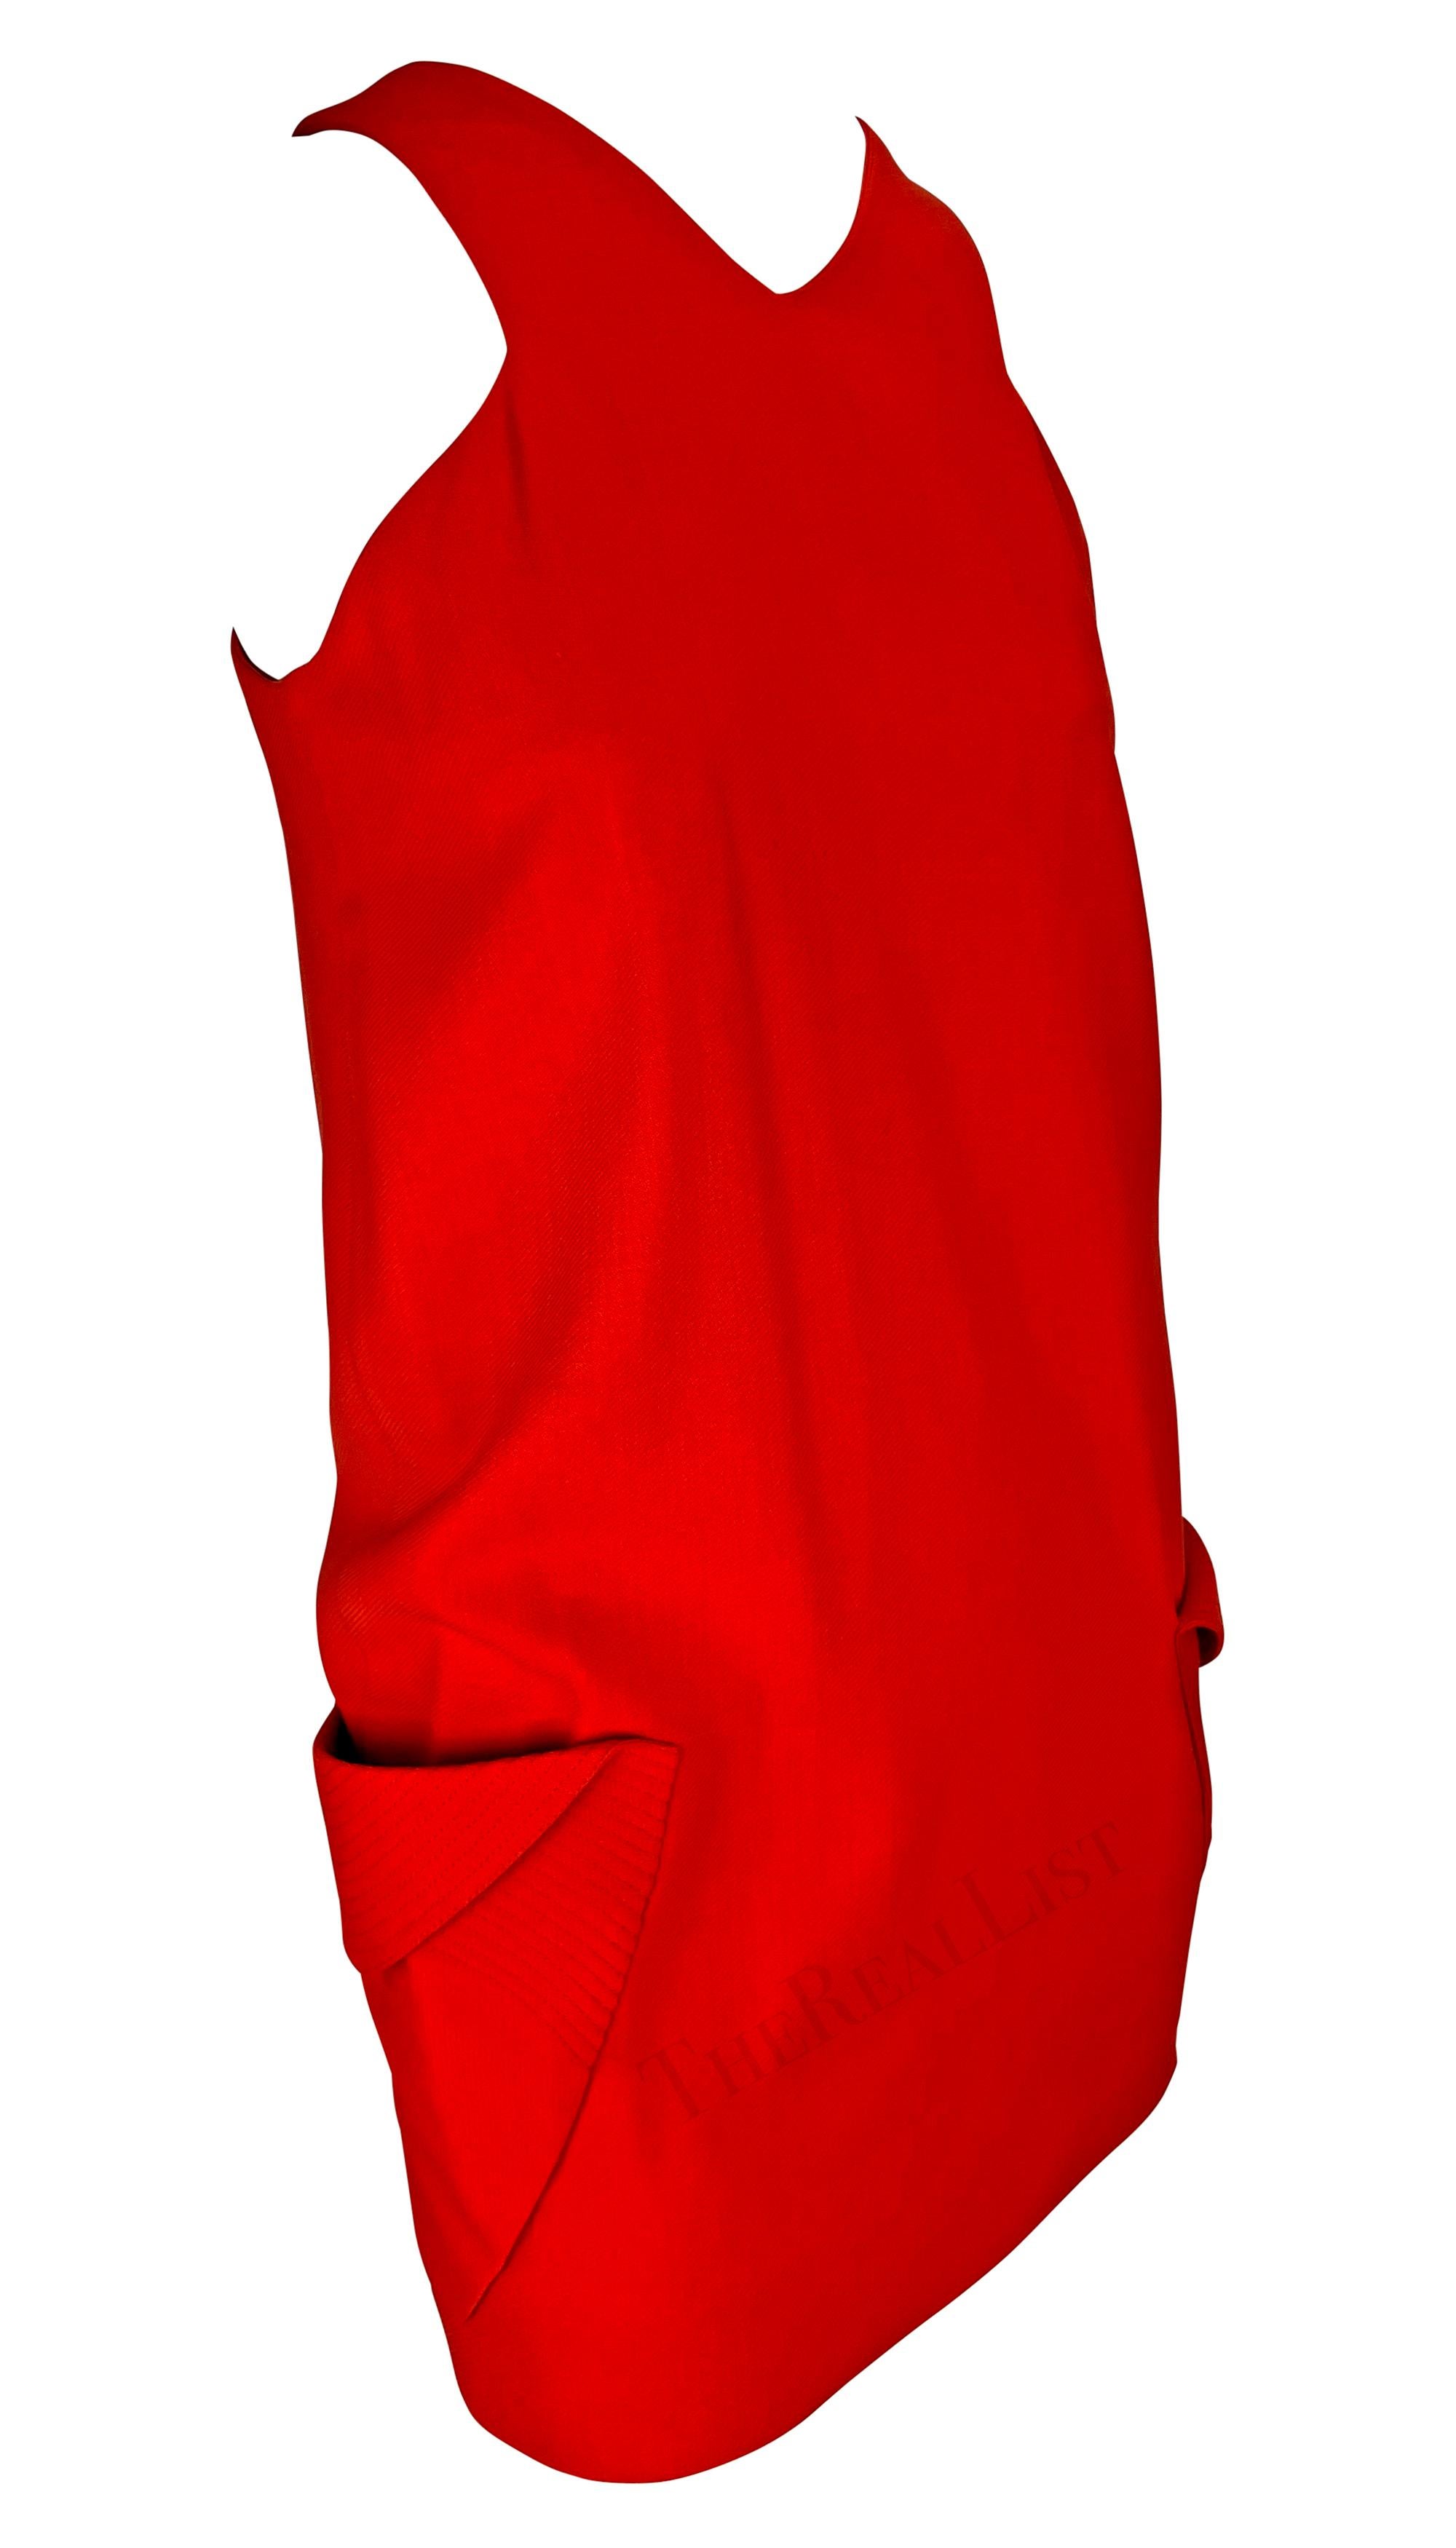 S/S 1991 Gianni Versace Runway Ad Red Sleeveless Pocket Mini Shift Dress For Sale 7